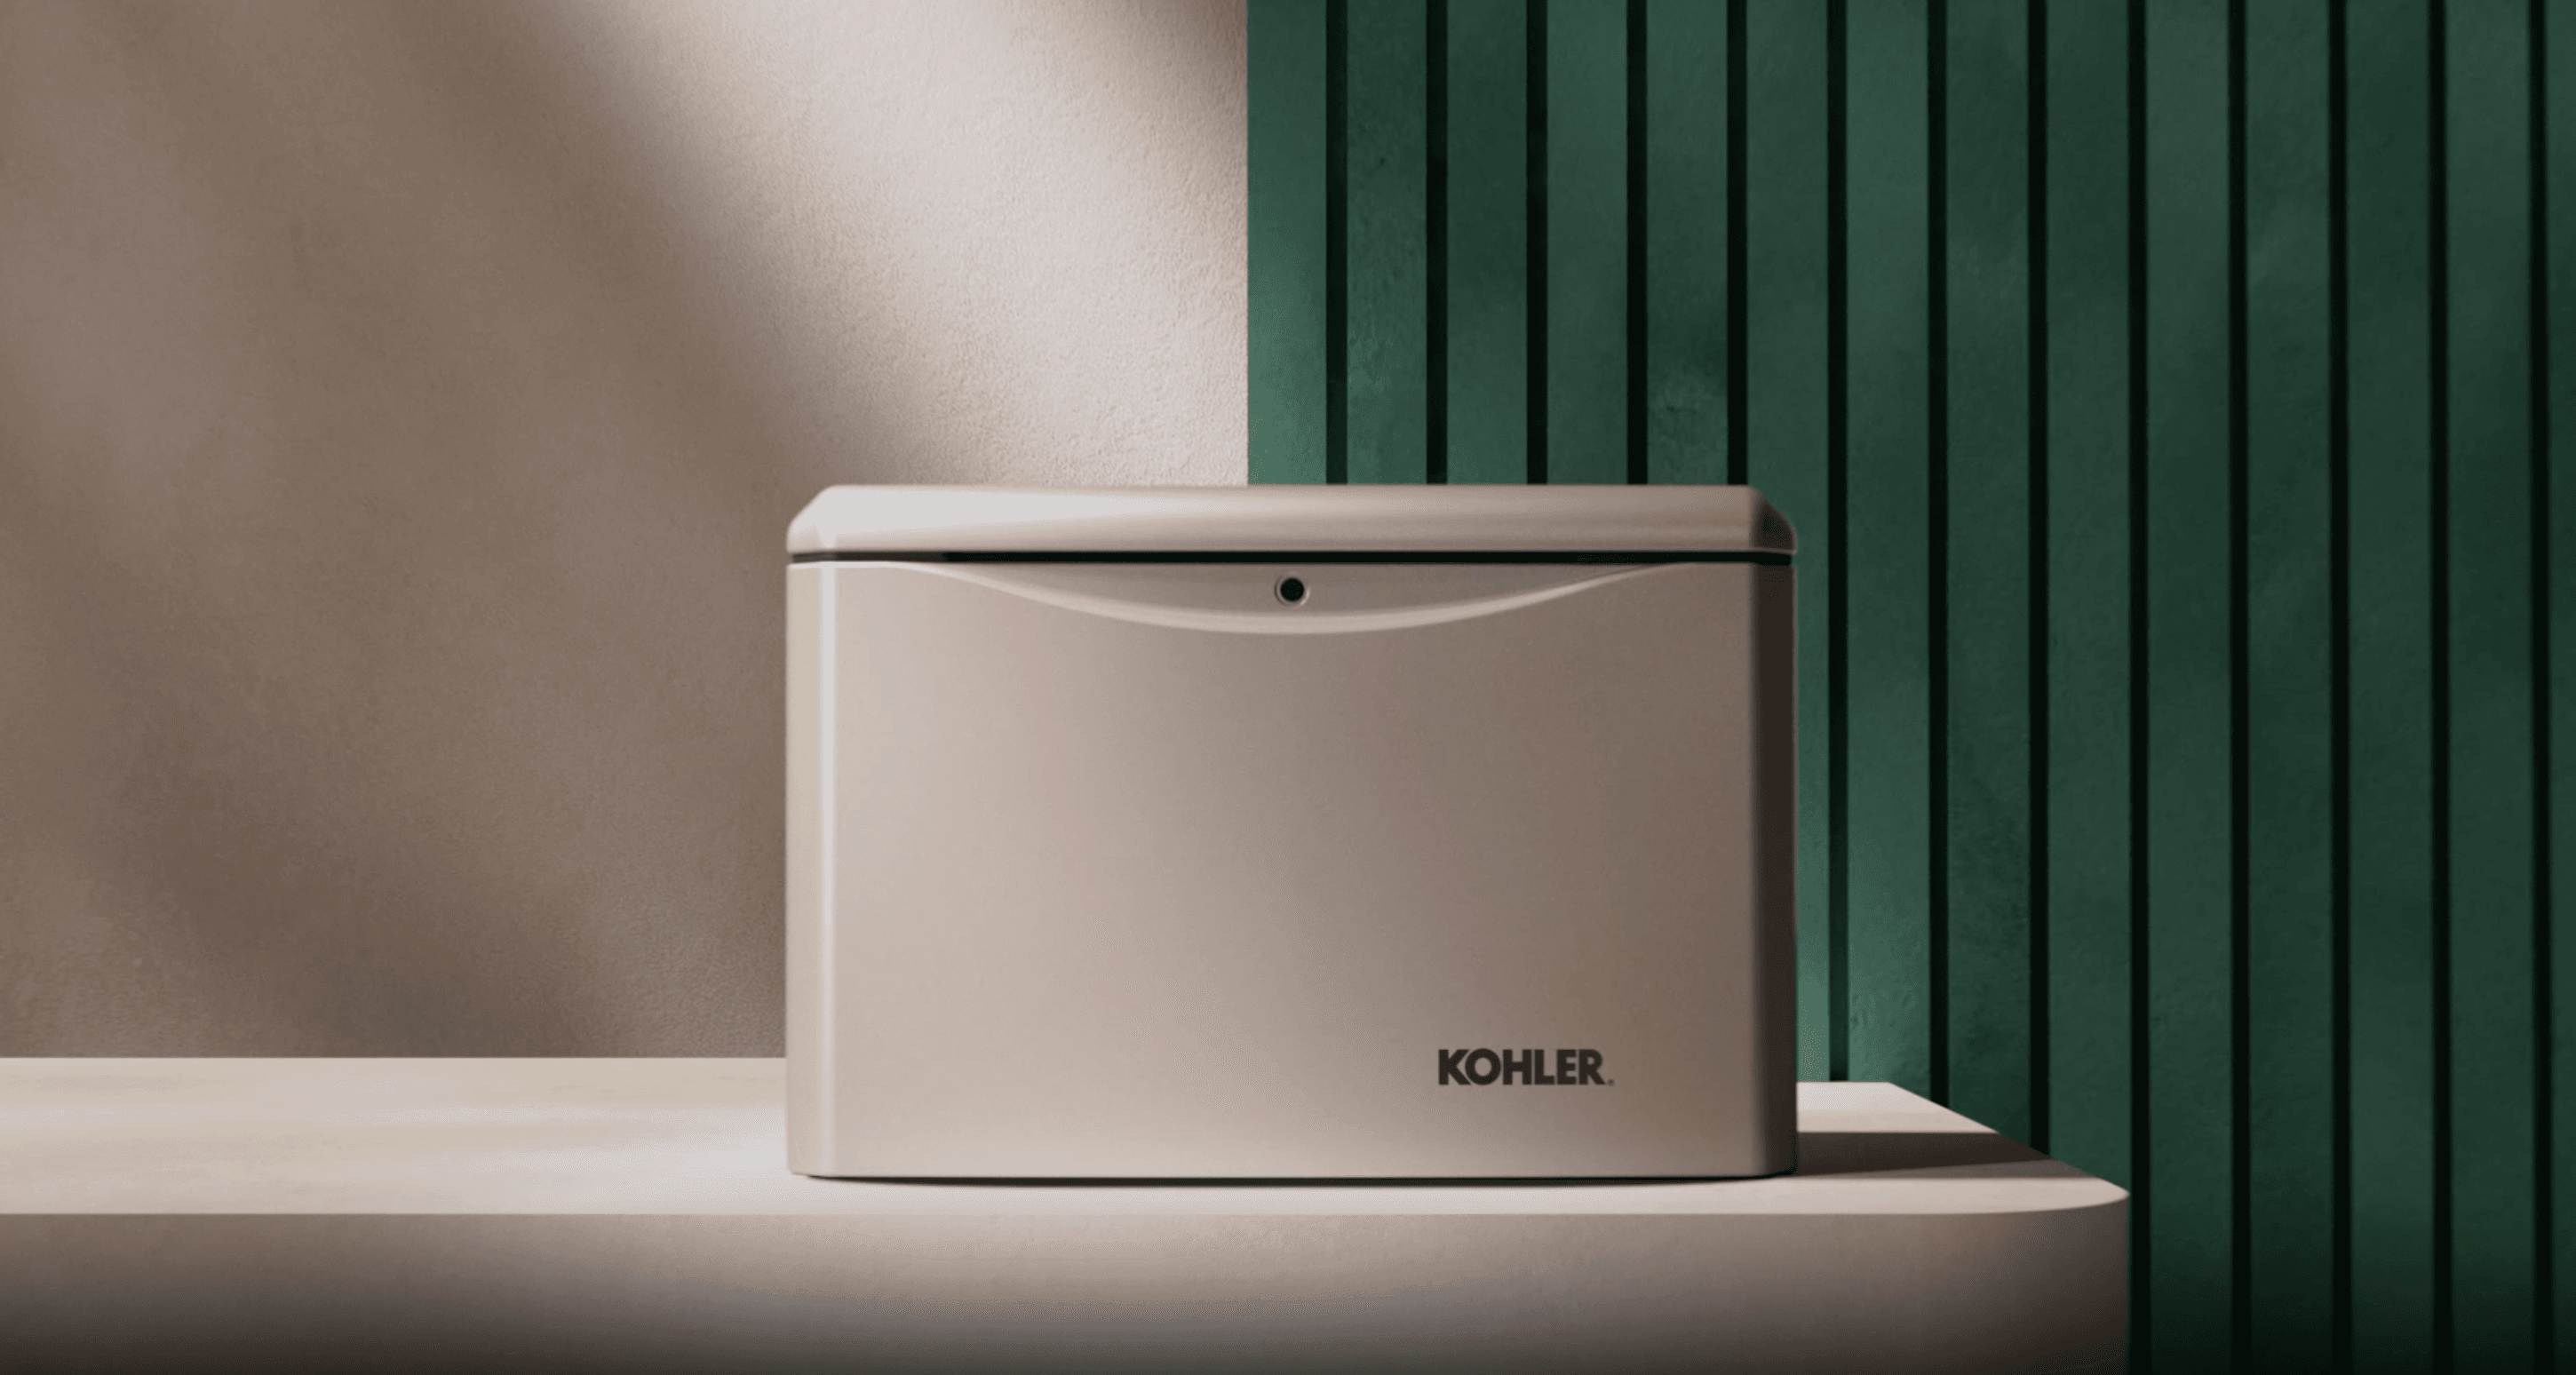 Artful image of grey Kohler home generator on a rectangle platform with rounded corners. Behind the generator is a wall of narrow wood panel painted green. Dramatic lighting casts shadows across the platform and generator